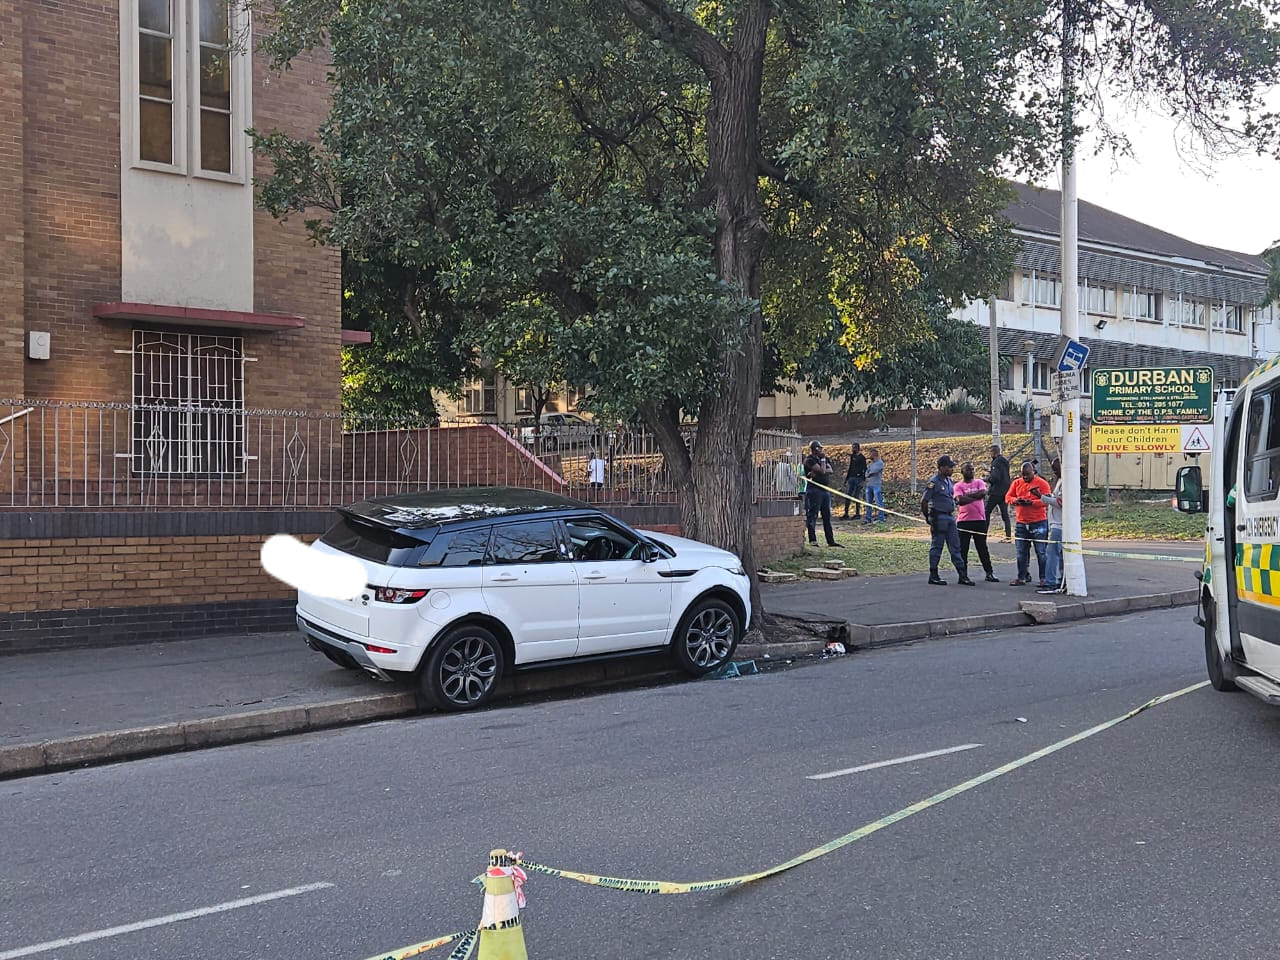 Drive-by shooting in Durban